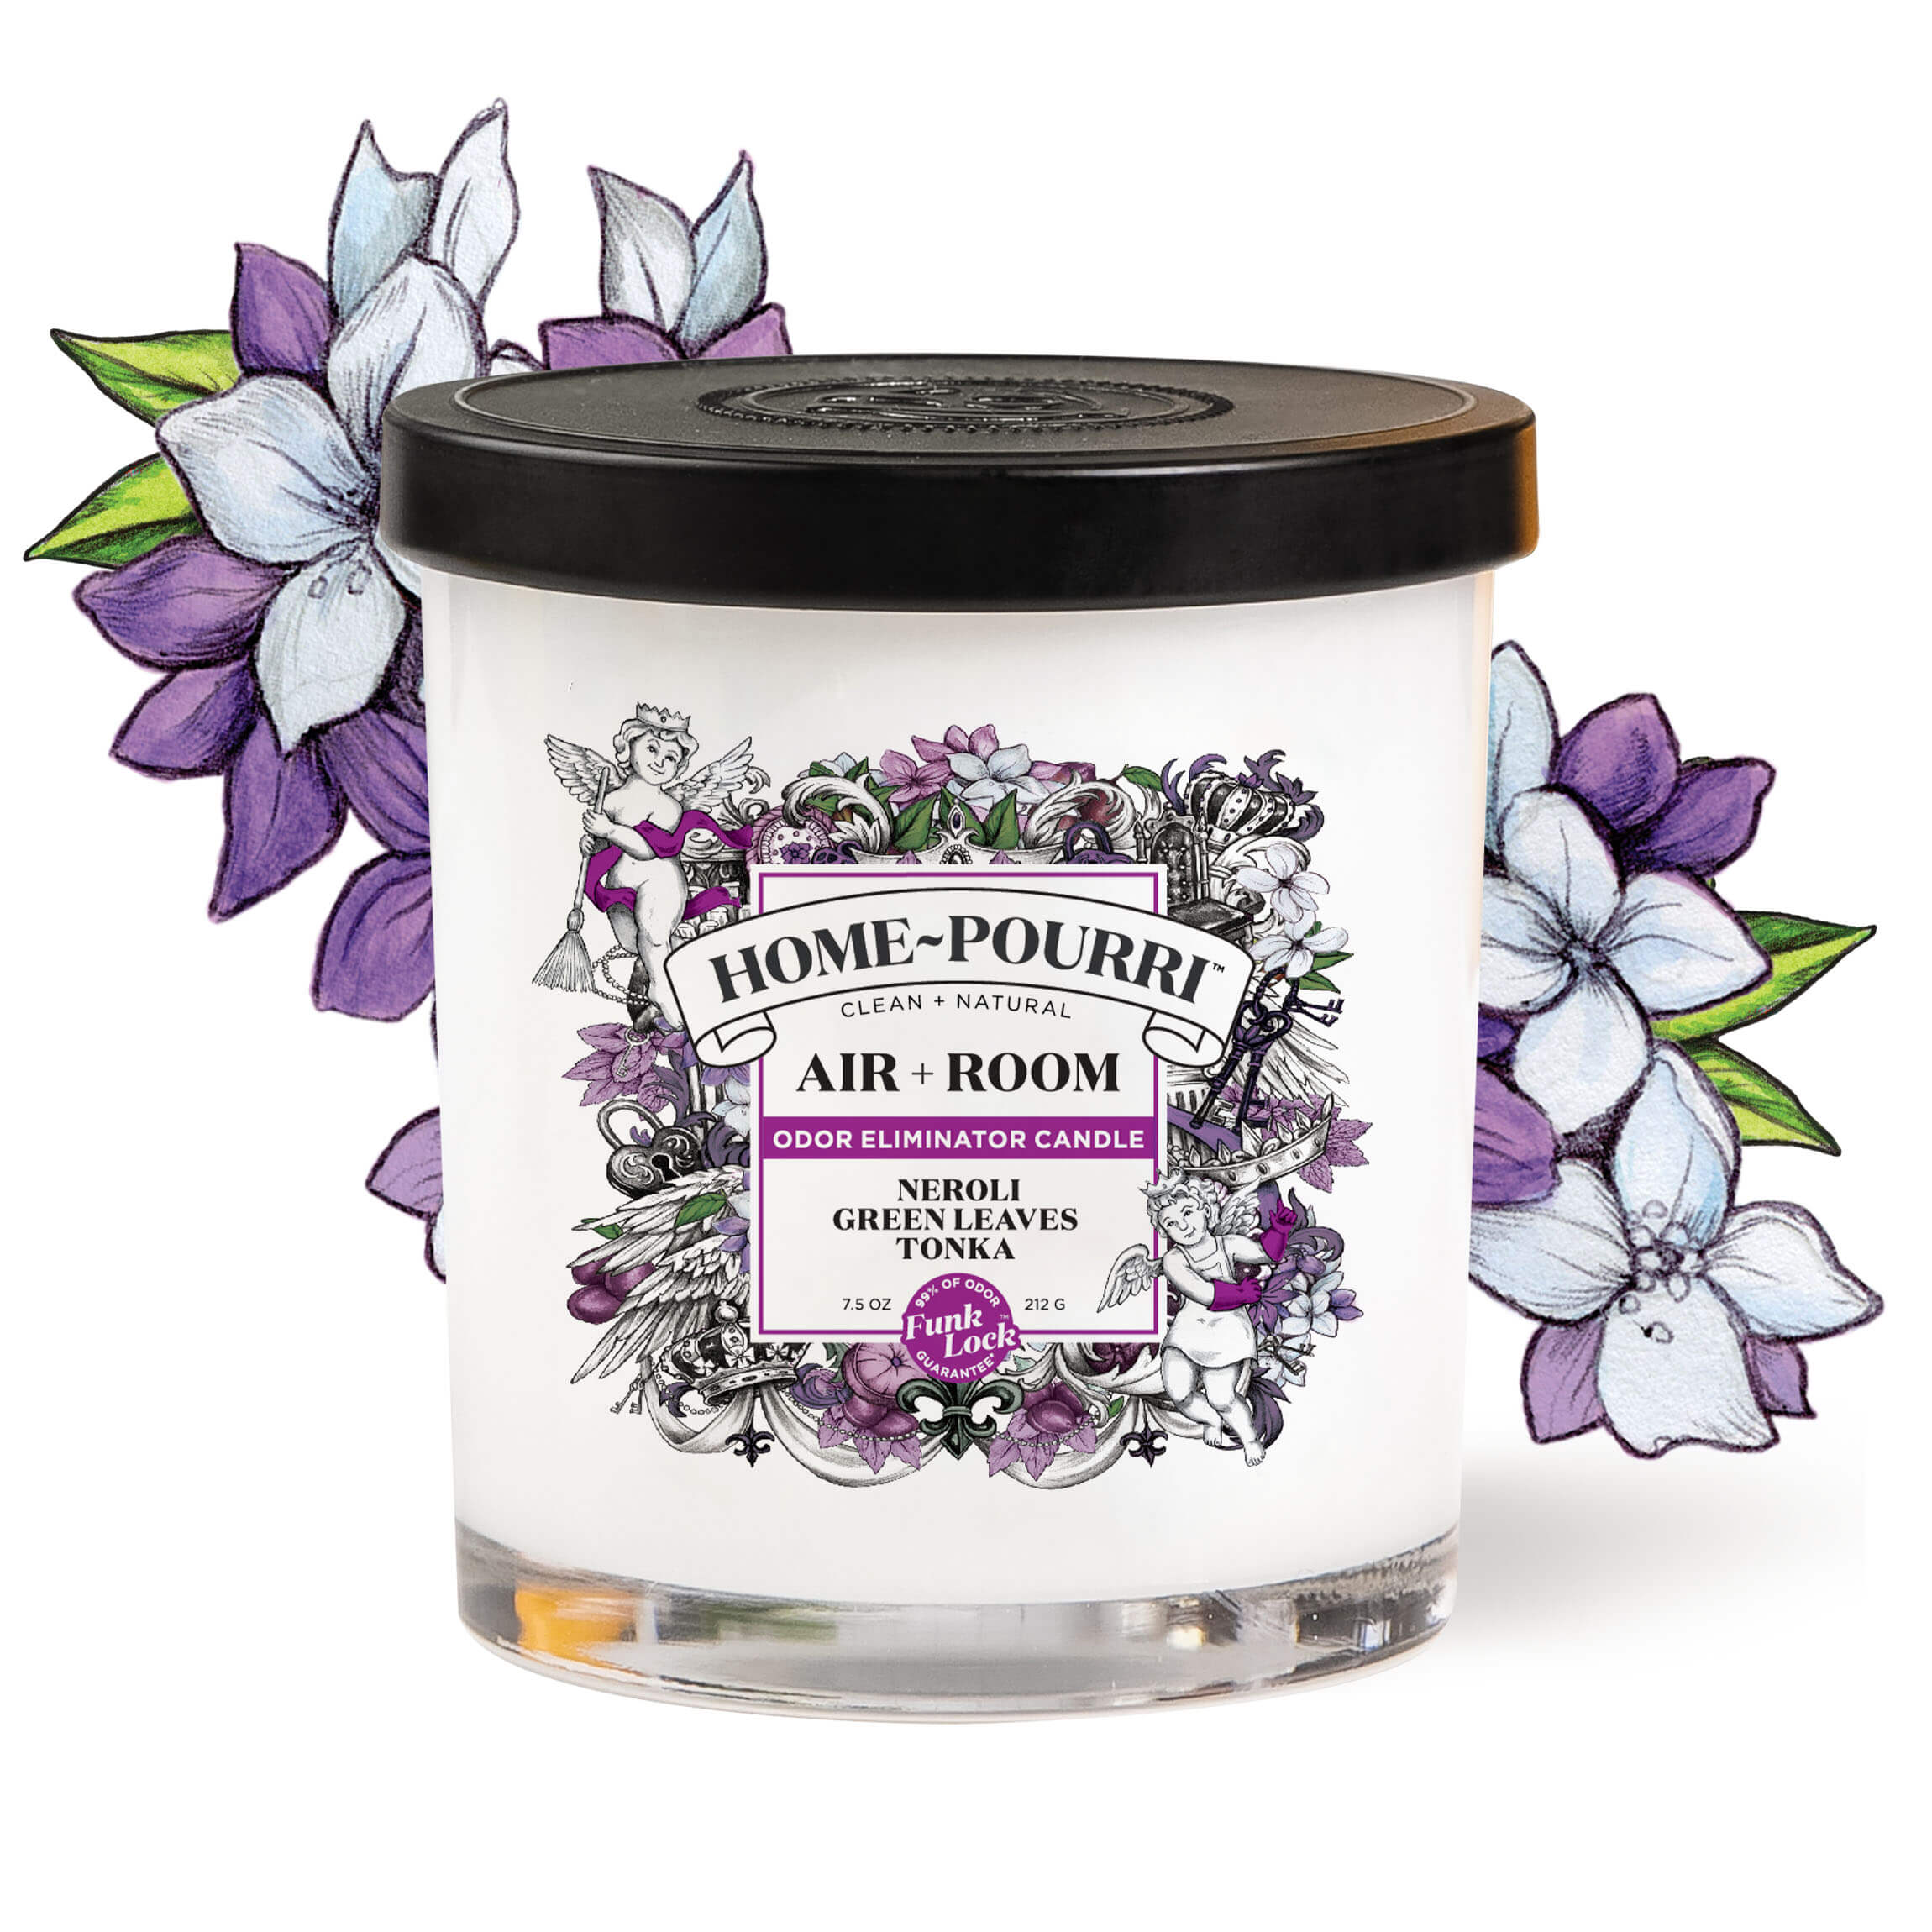 Nerolie Green Leaves Tonka Candle by Poo-Pourri